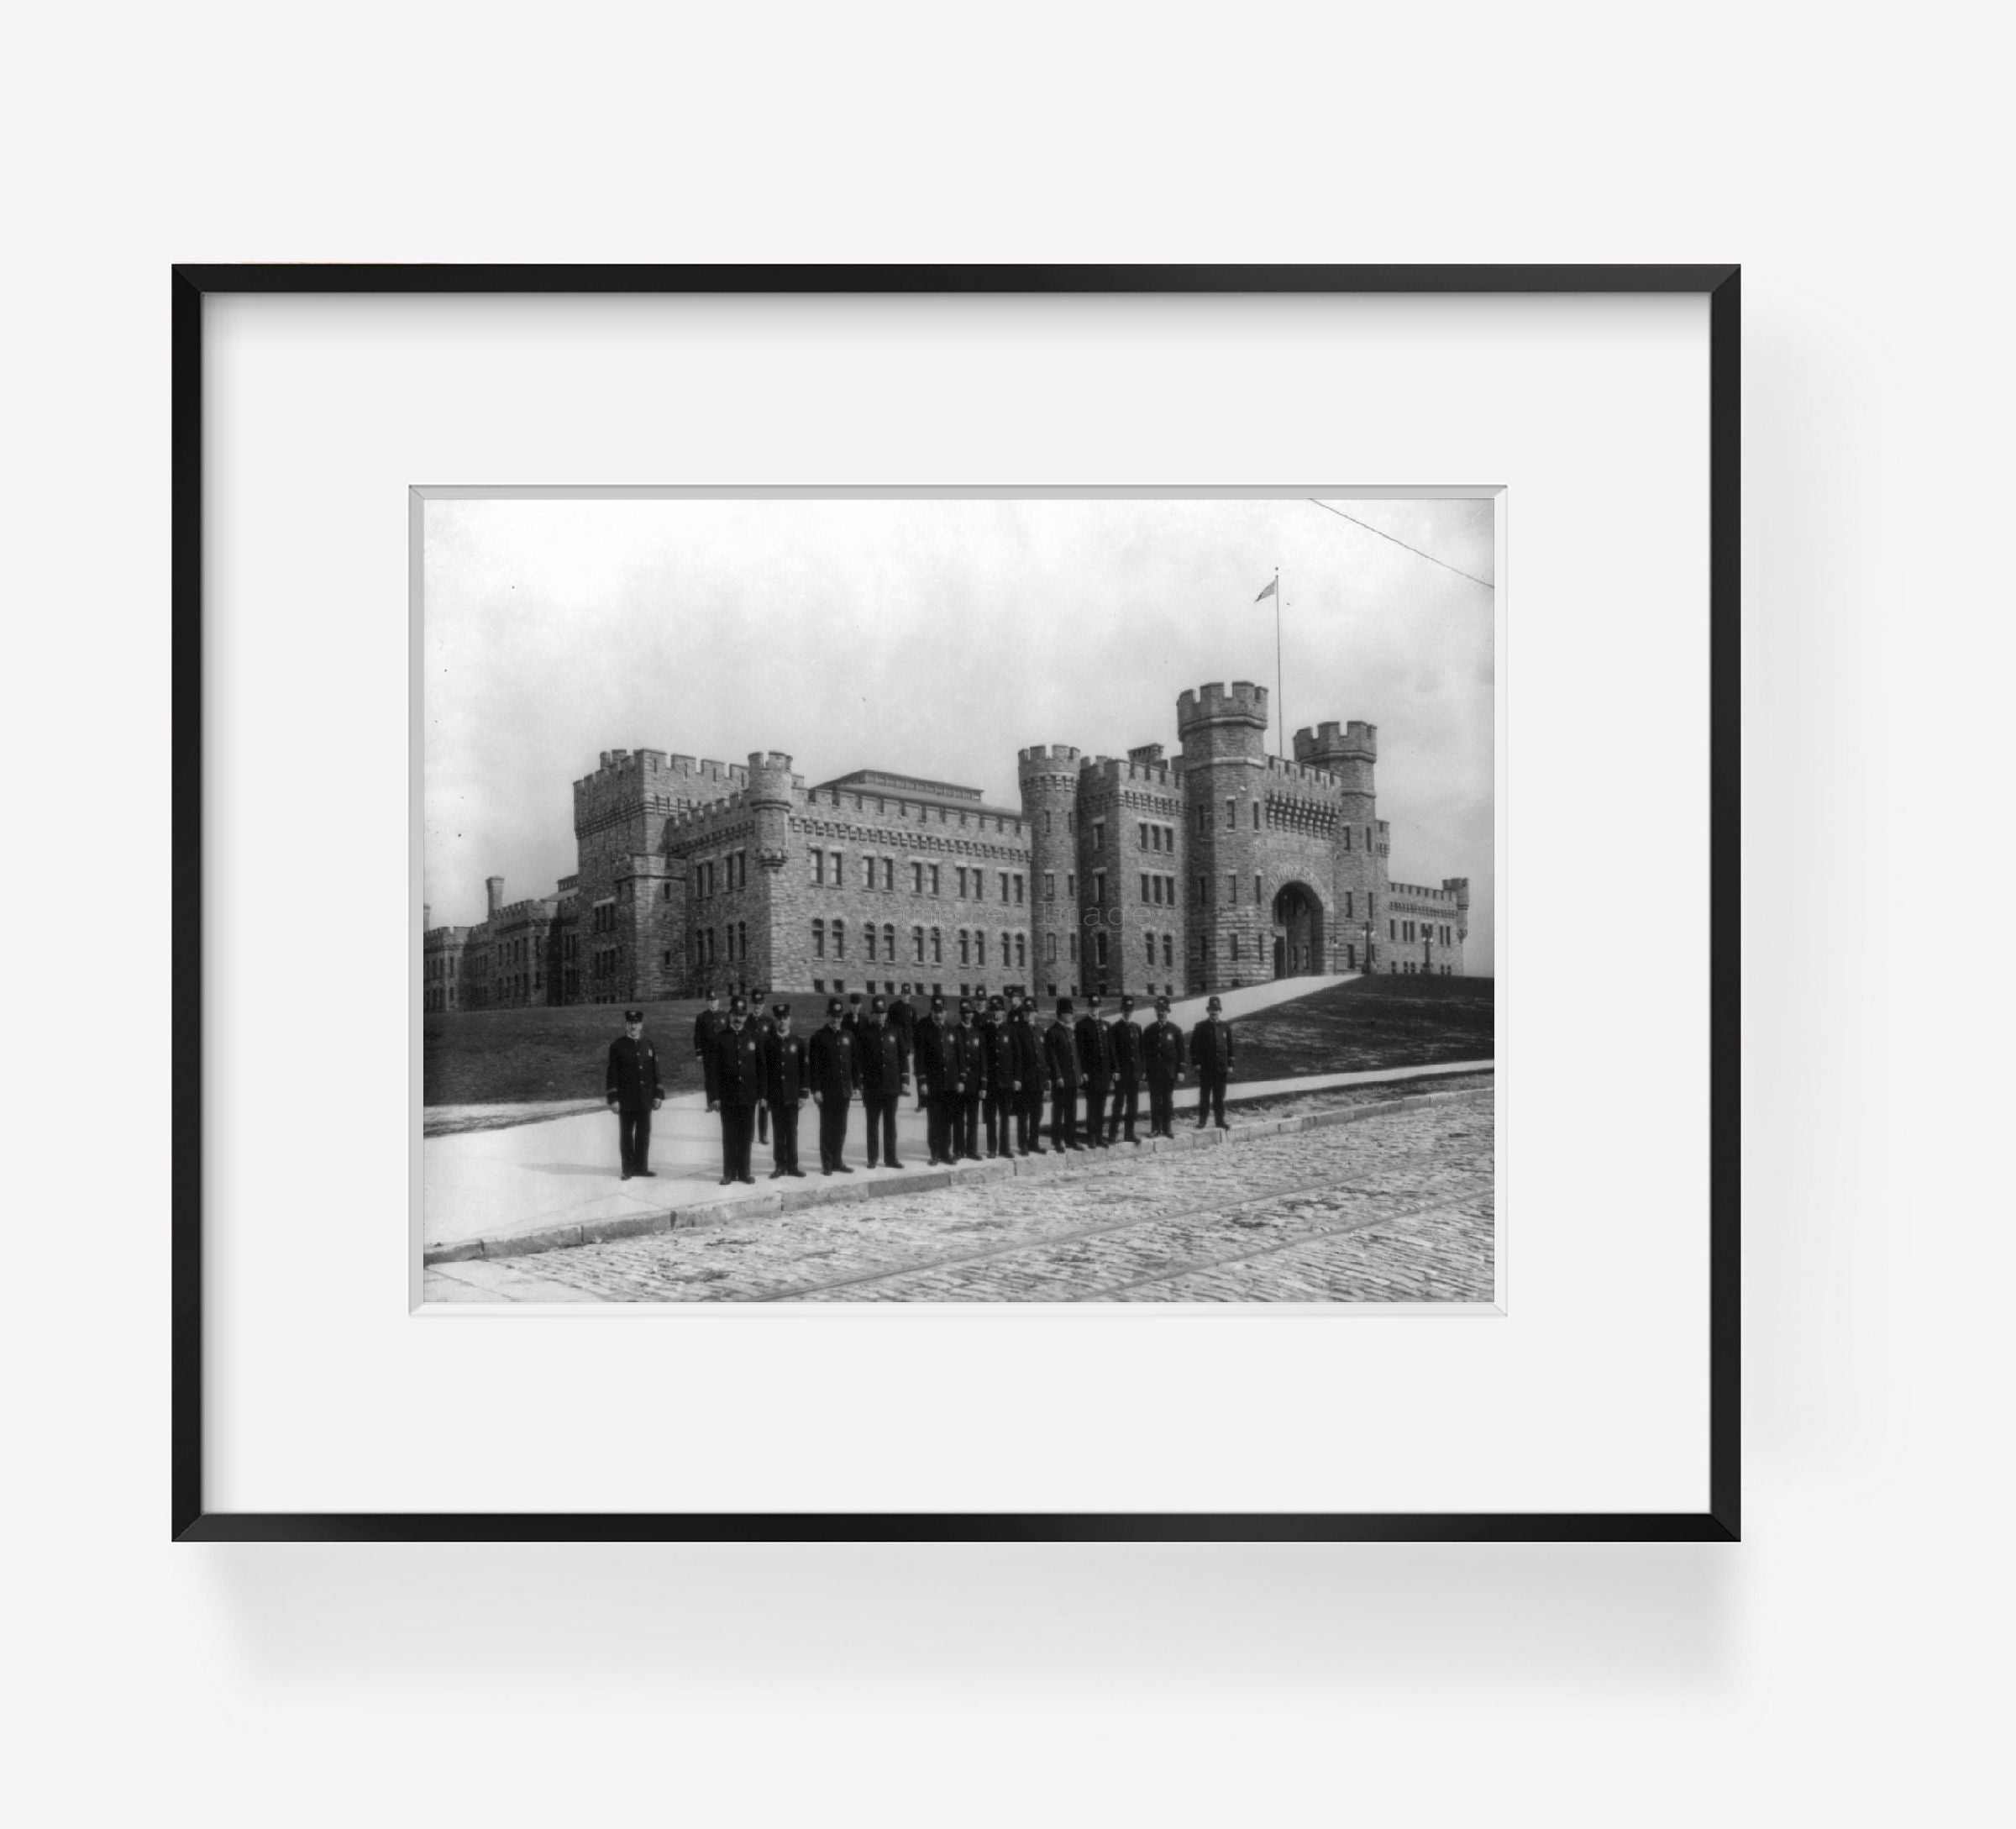 Photo: Policemen assembled before 65th Regiment Armory, Buffalo, Erie County, N.Y.,